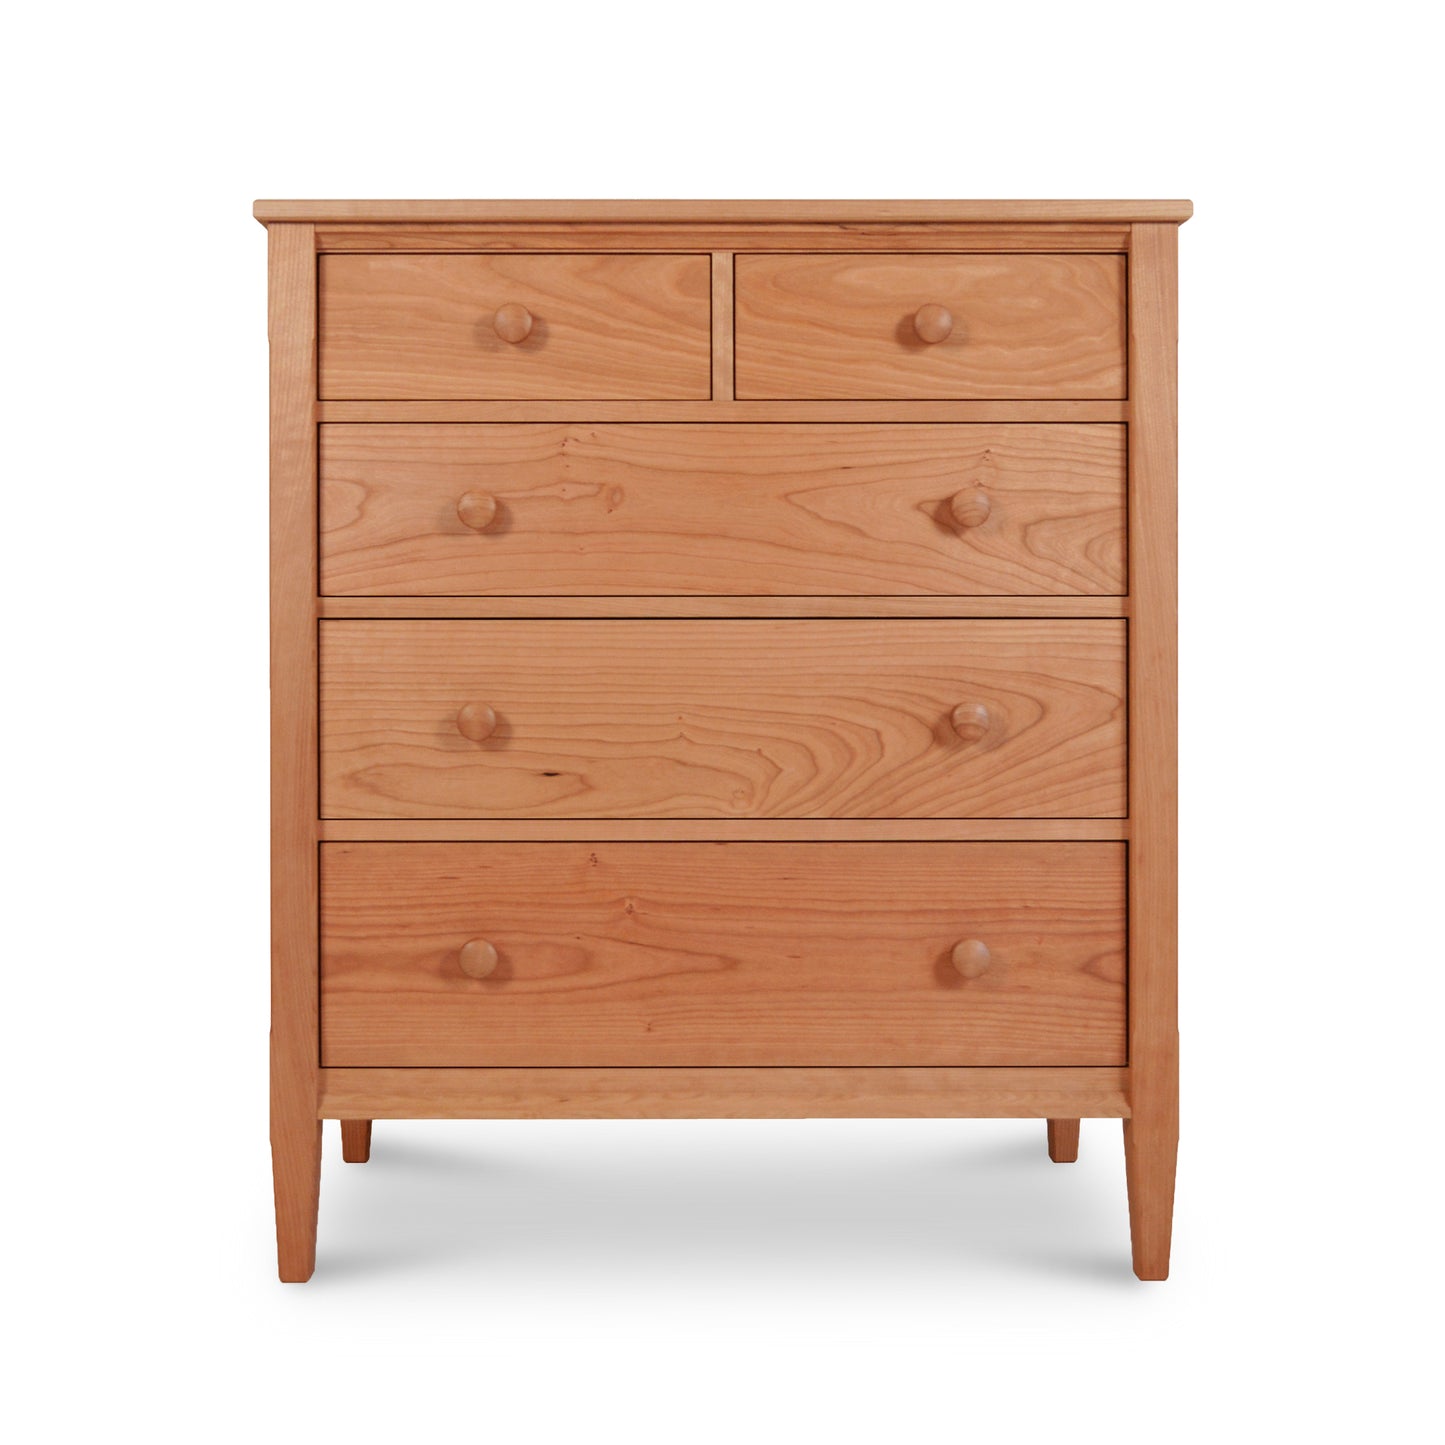 A Vermont Shaker 5-Drawer Chest by Maple Corner Woodworks. The chest features two smaller drawers on top and three larger drawers below, all with round knobs. It stands on four tapered legs, against a plain white background.